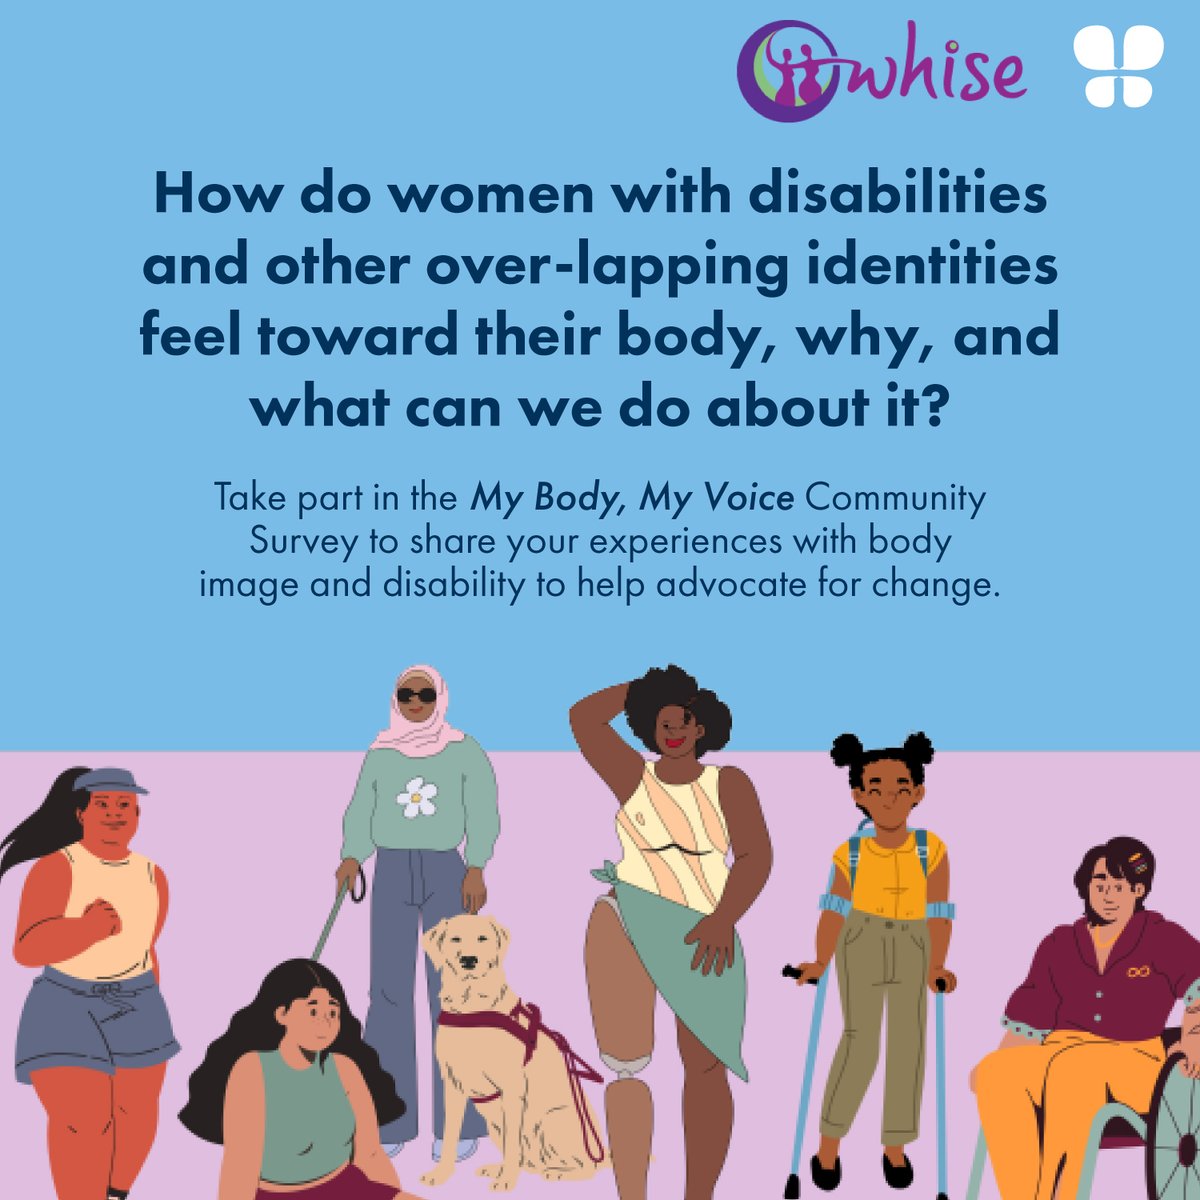 In collaboration with @whisewomen & @WDVtweet, Butterfly is exploring the experiences of body image by women with disabilities, chronic illnesses & other over-lapping identities. Share your insights to advocate for change in the healthcare sector⬇️ whise.org.au/my-body-my-voi…